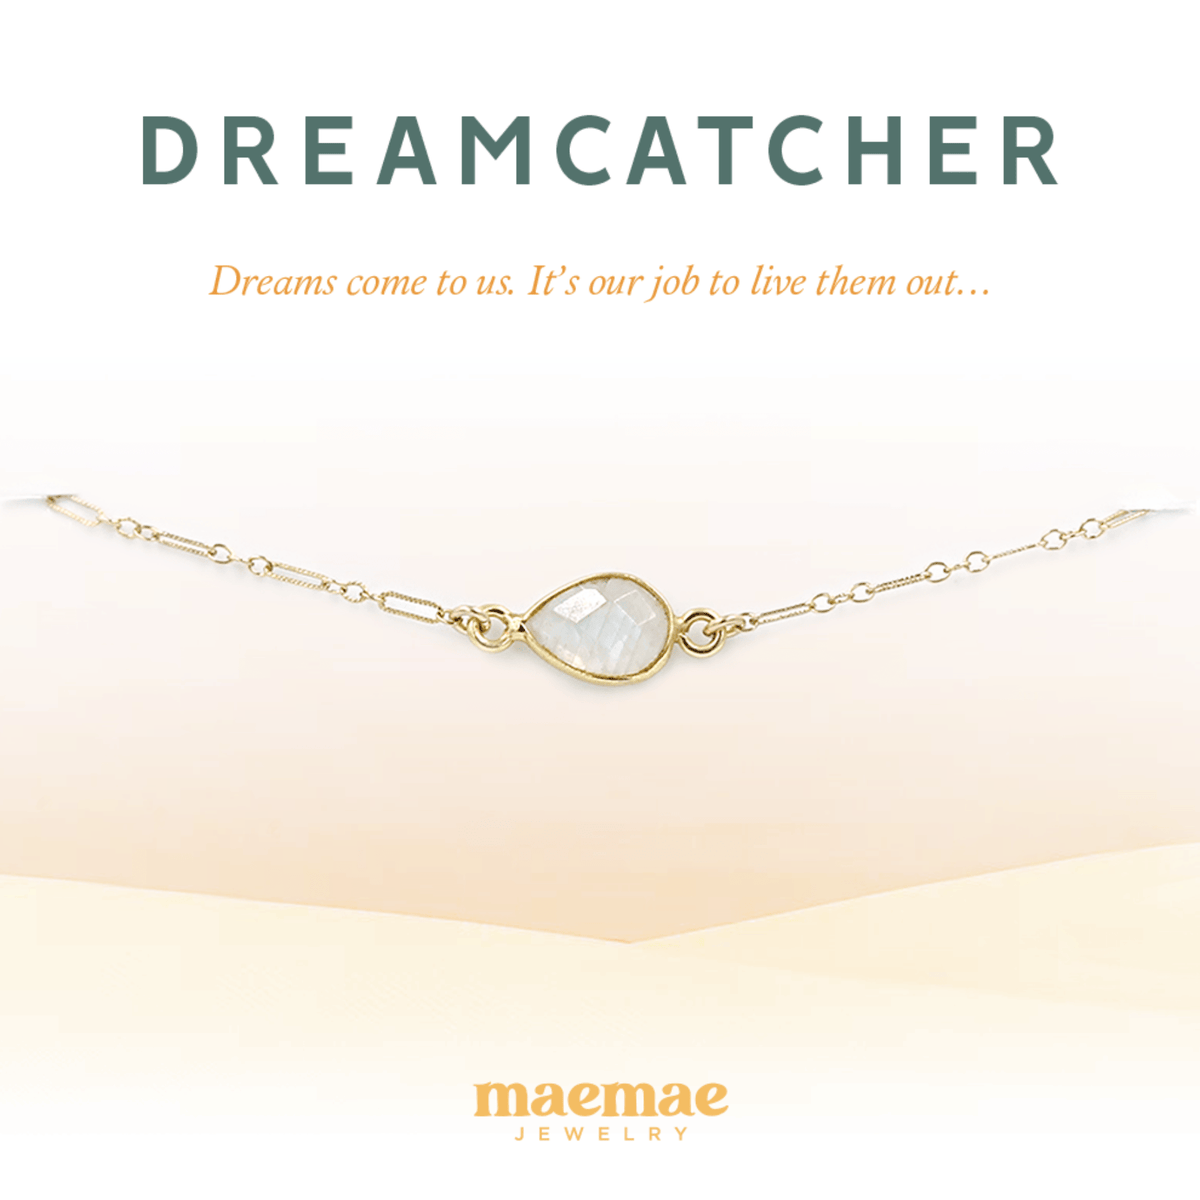 MaeMae Jewelry Dreamcatcher 14k gold filled bracelet with drop pendant